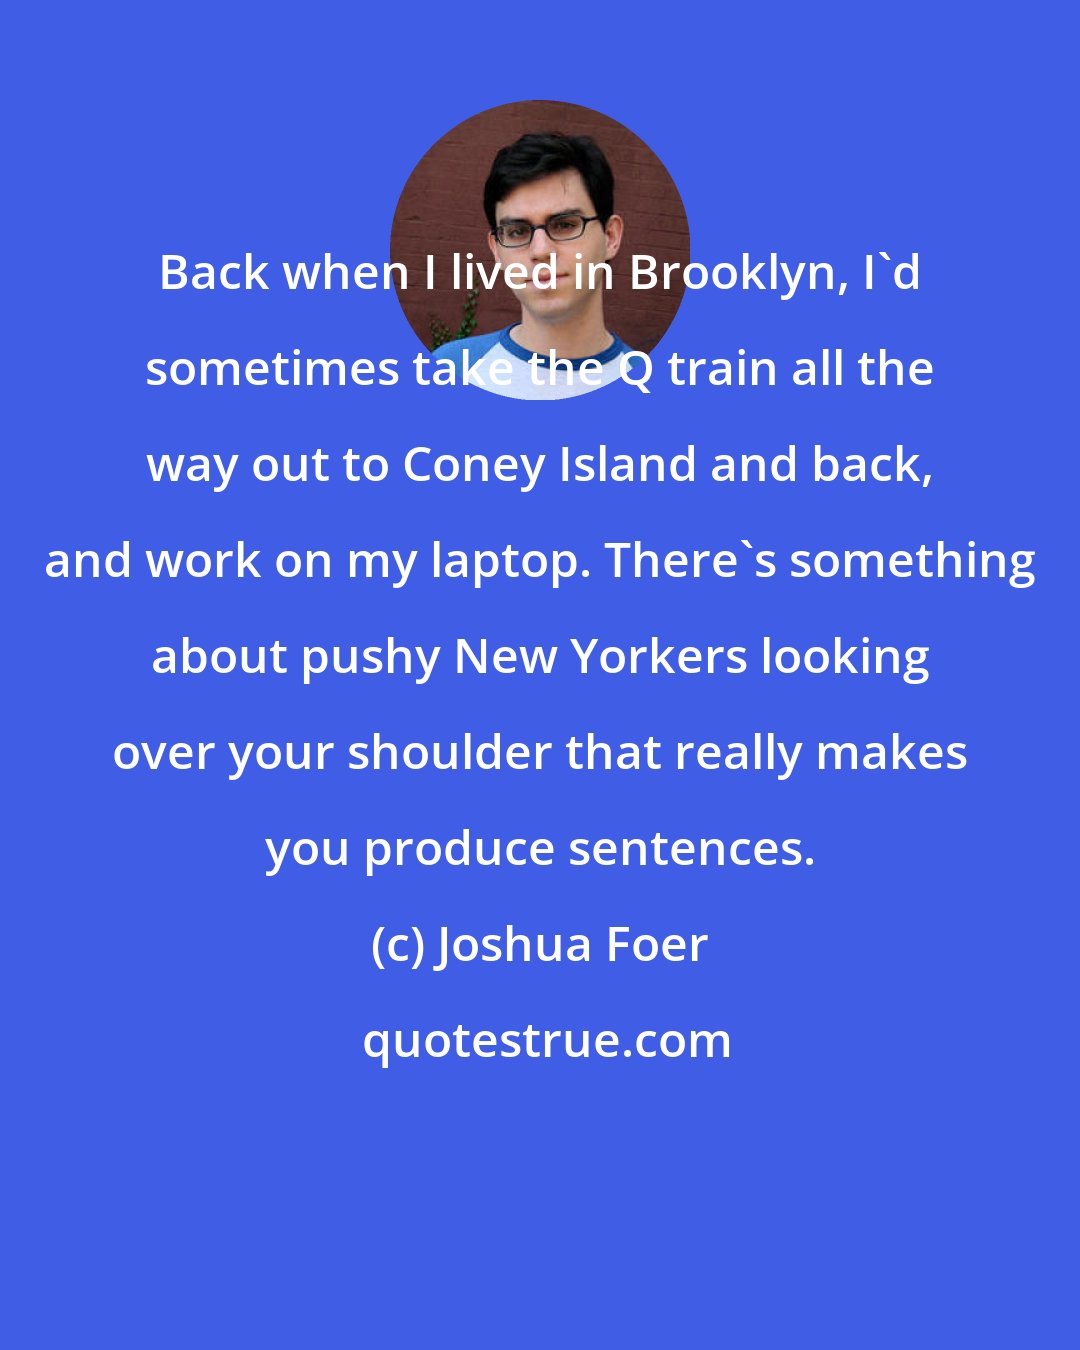 Joshua Foer: Back when I lived in Brooklyn, I'd sometimes take the Q train all the way out to Coney Island and back, and work on my laptop. There's something about pushy New Yorkers looking over your shoulder that really makes you produce sentences.